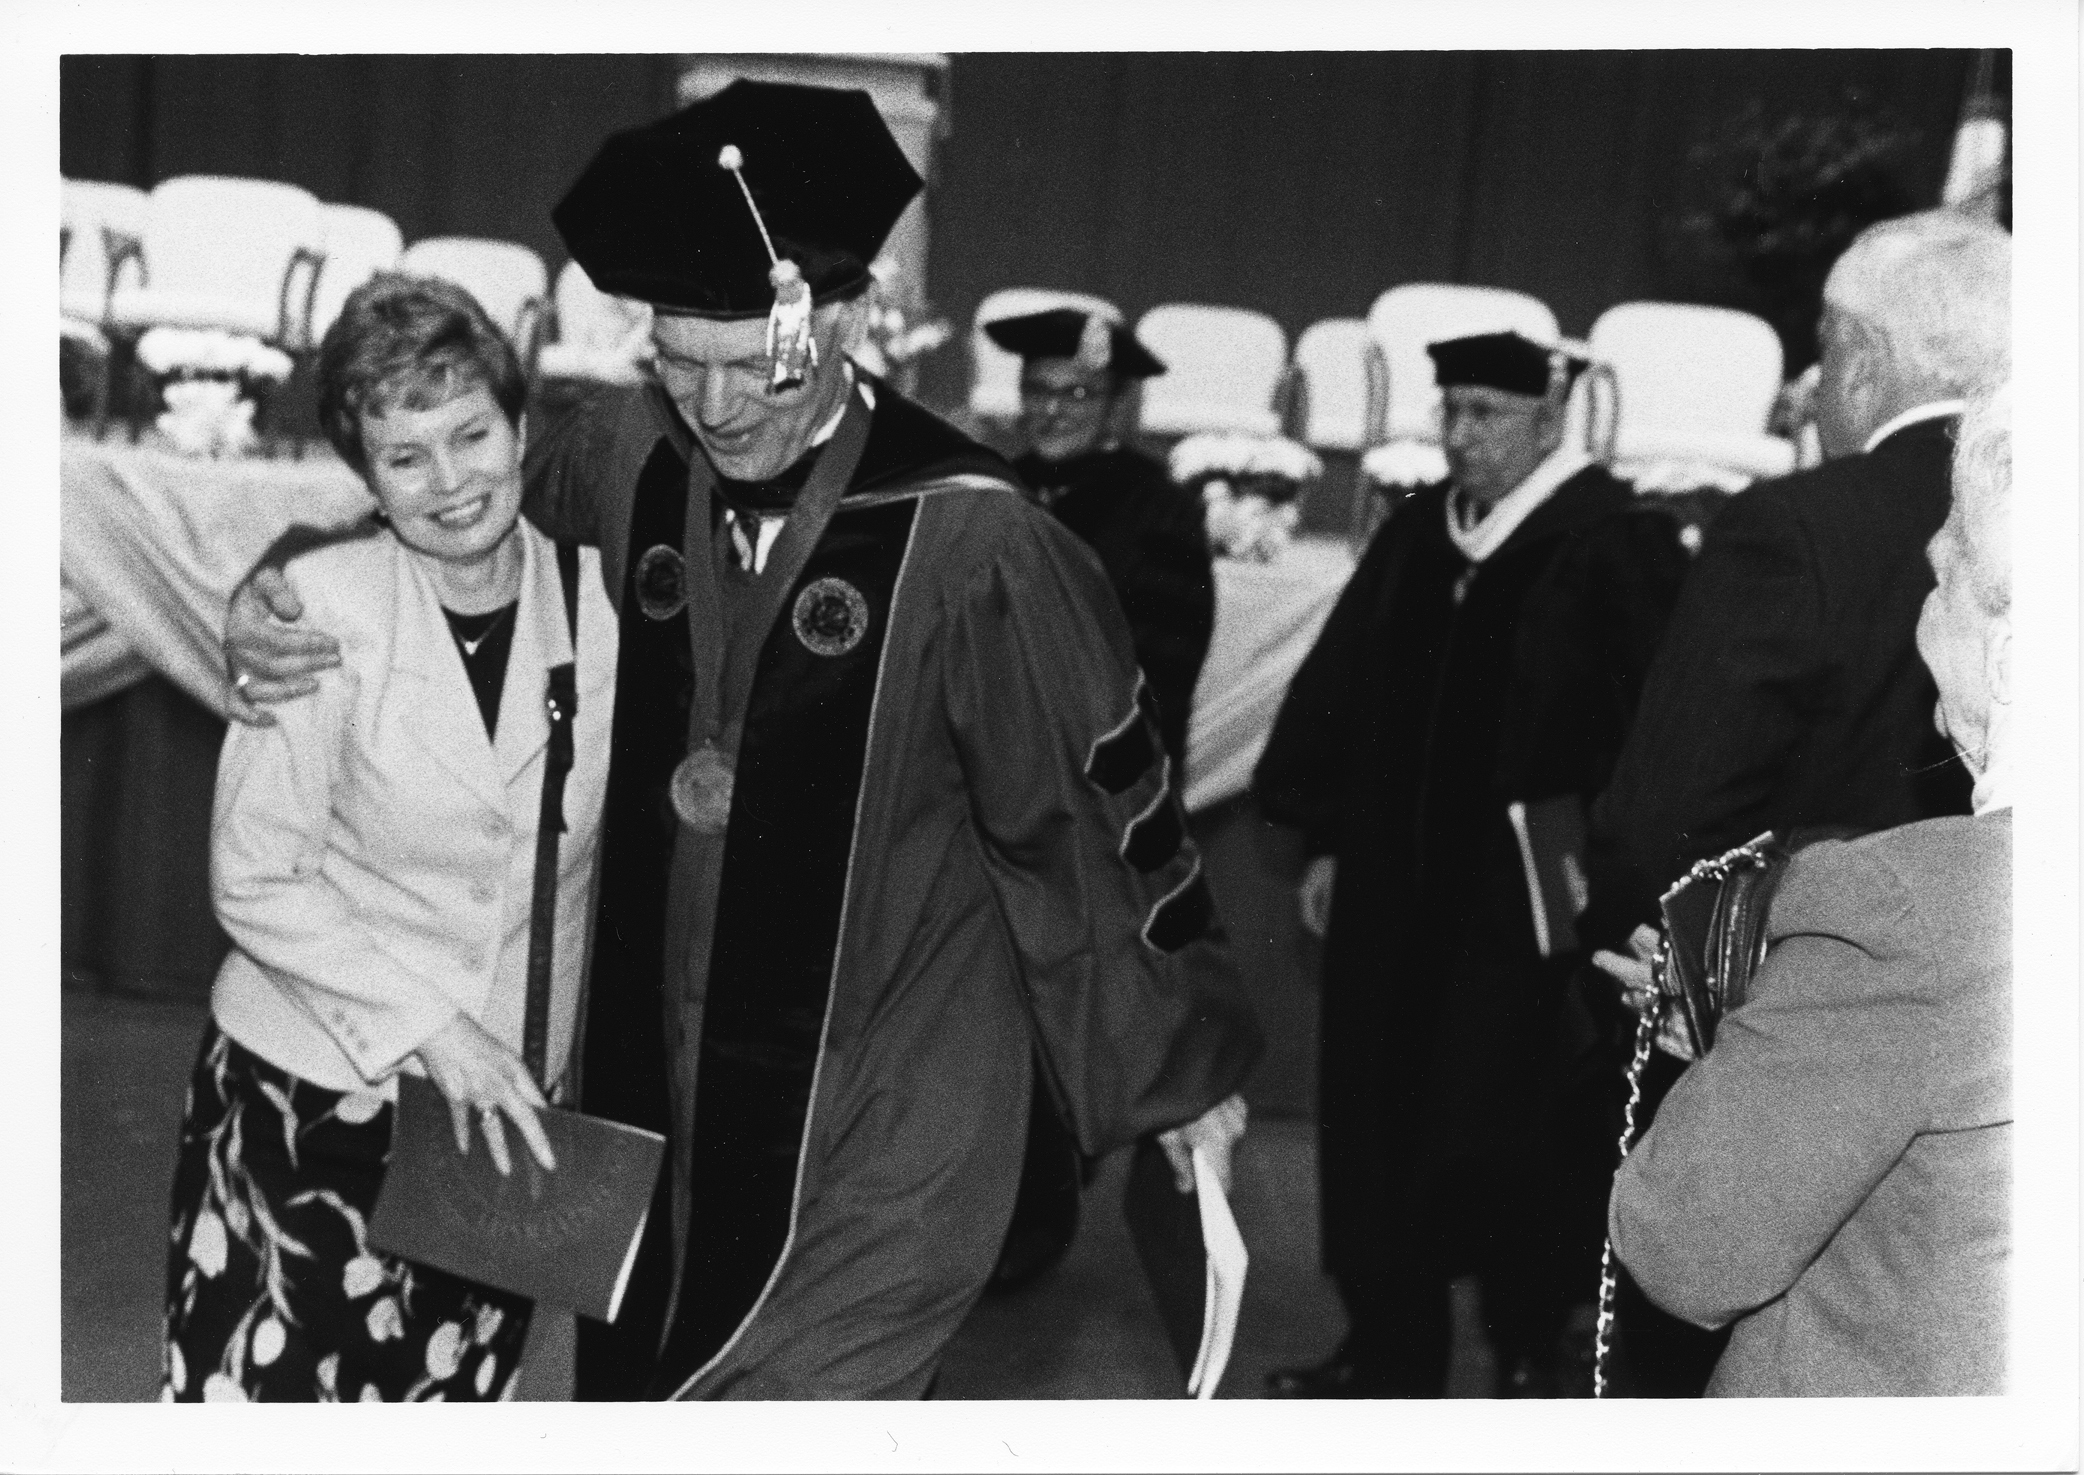 Dr. Alan G. Merten and wife, and Sally Merten at his inauguration, April 4, 1997 